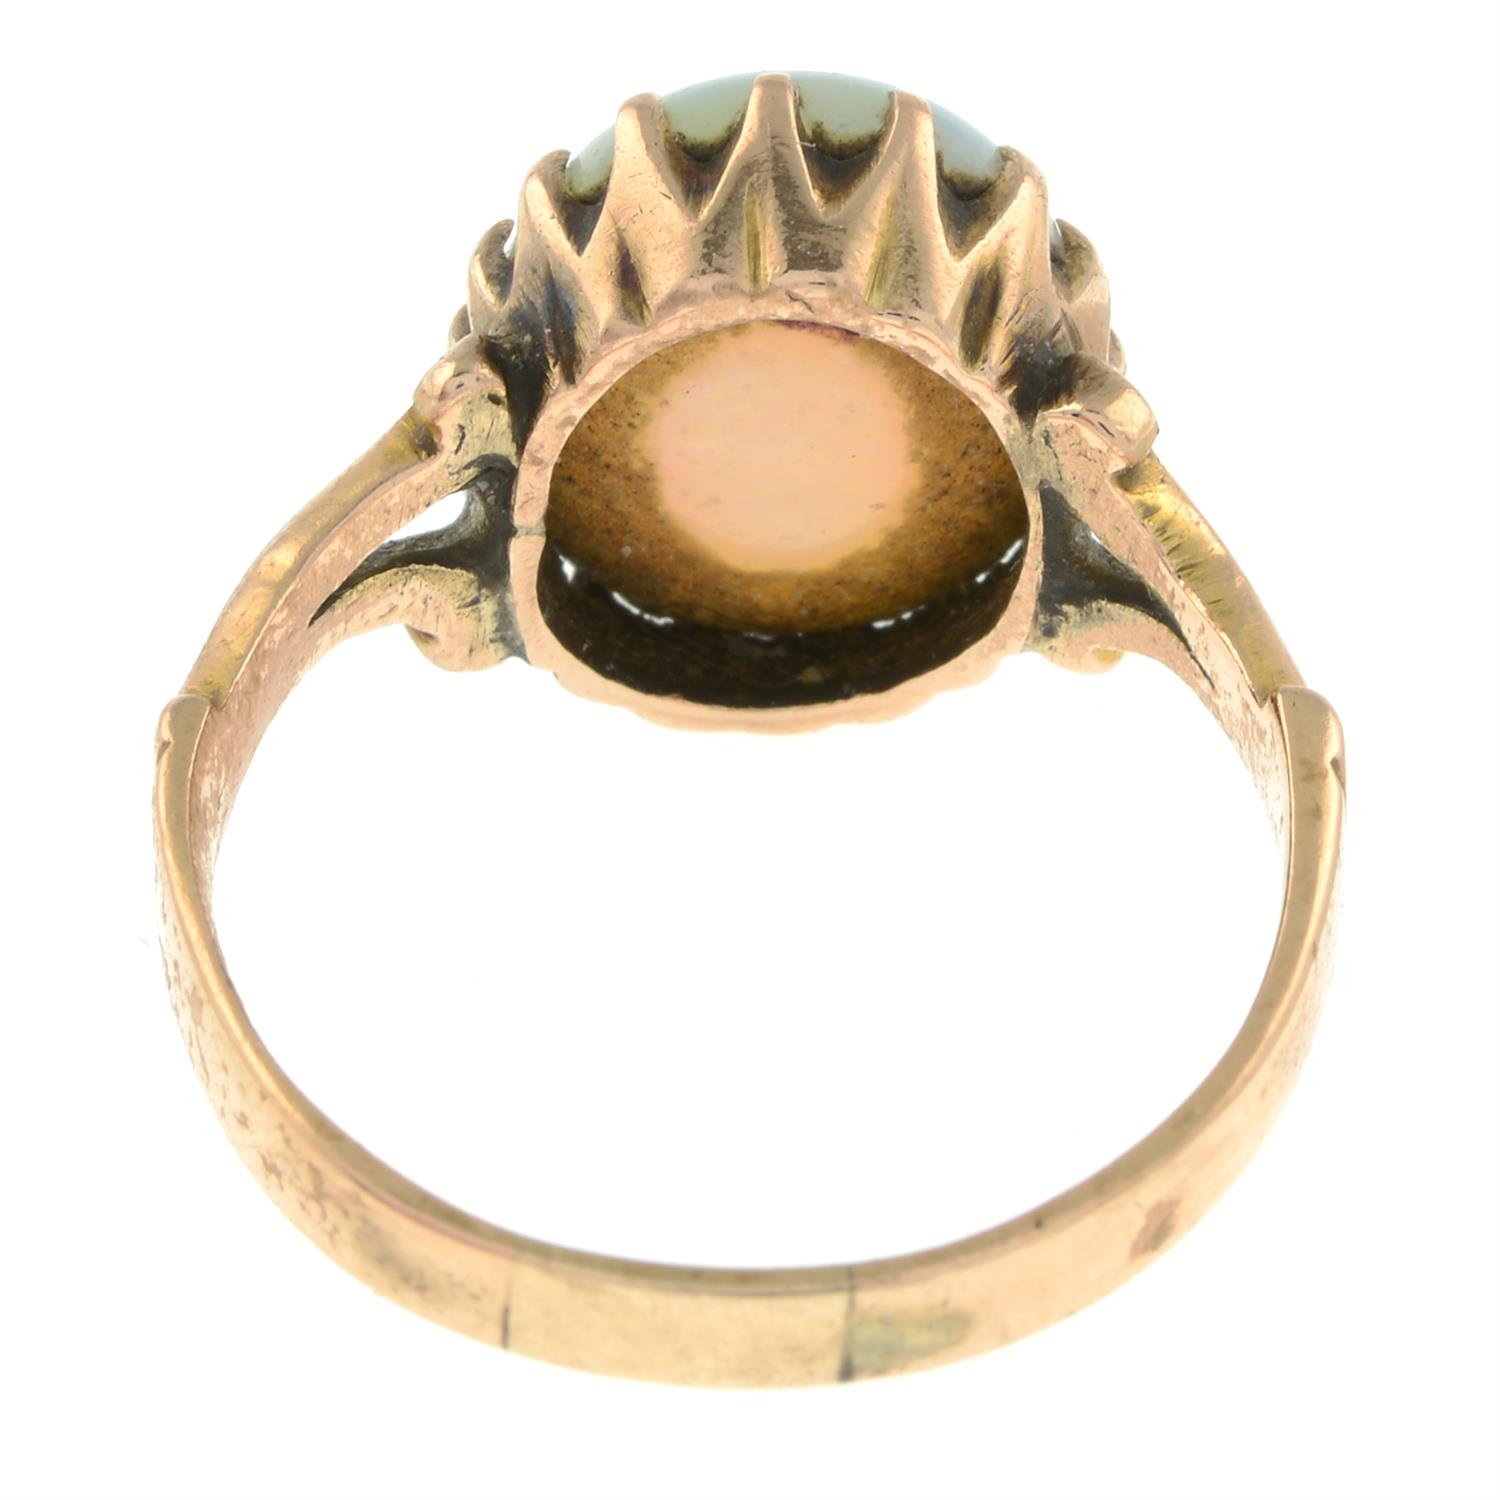 An early to mid 20th century gold opal single-stone ring. - Image 2 of 2